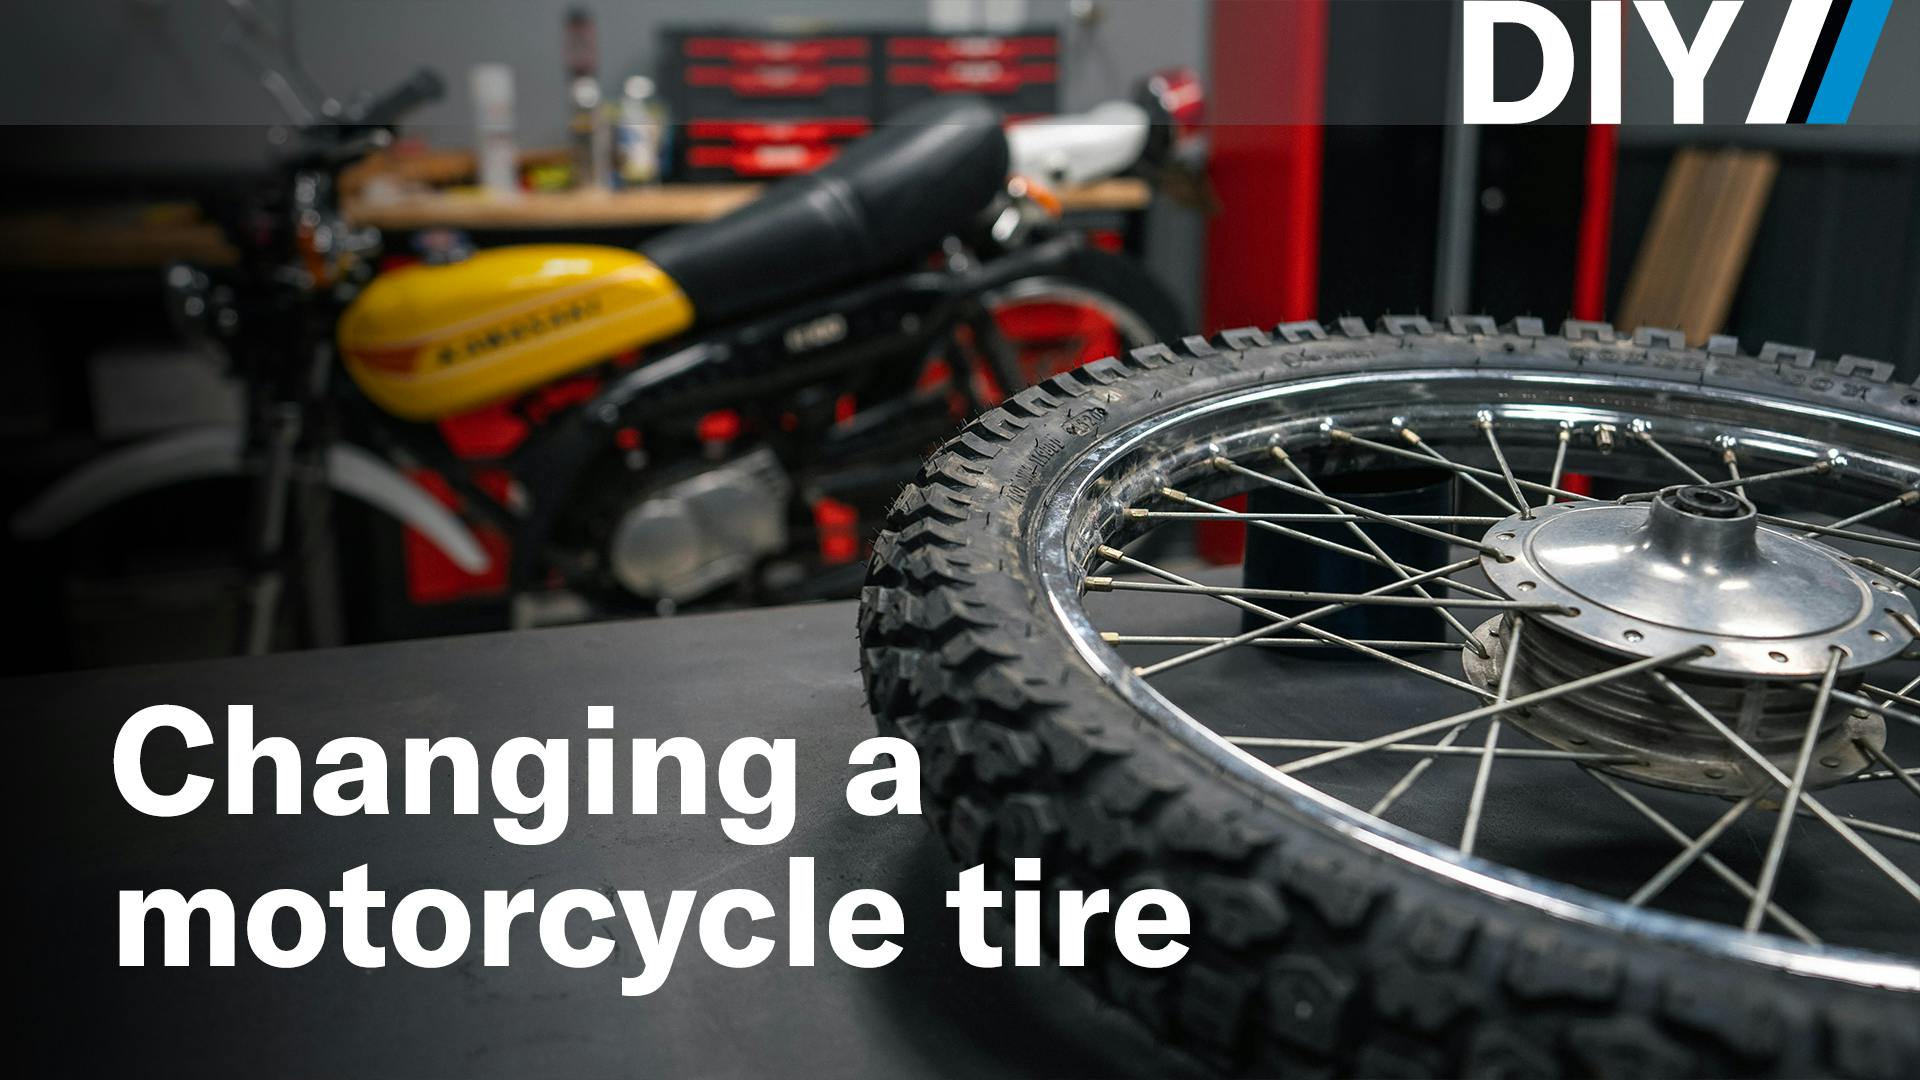 DIY changing a motorcycle tire